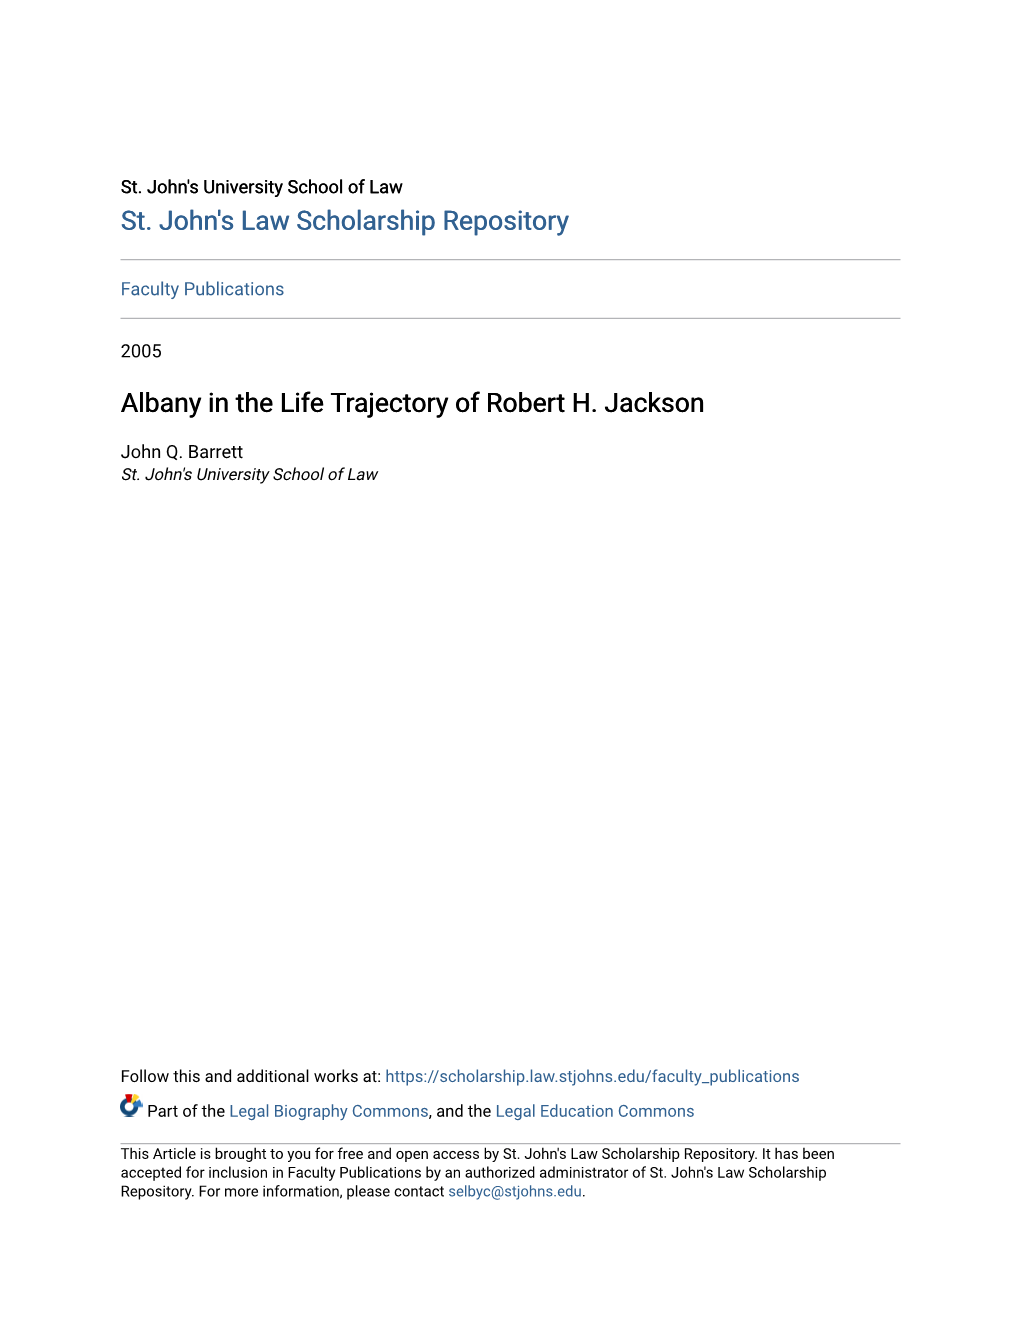 Albany in the Life Trajectory of Robert H. Jackson